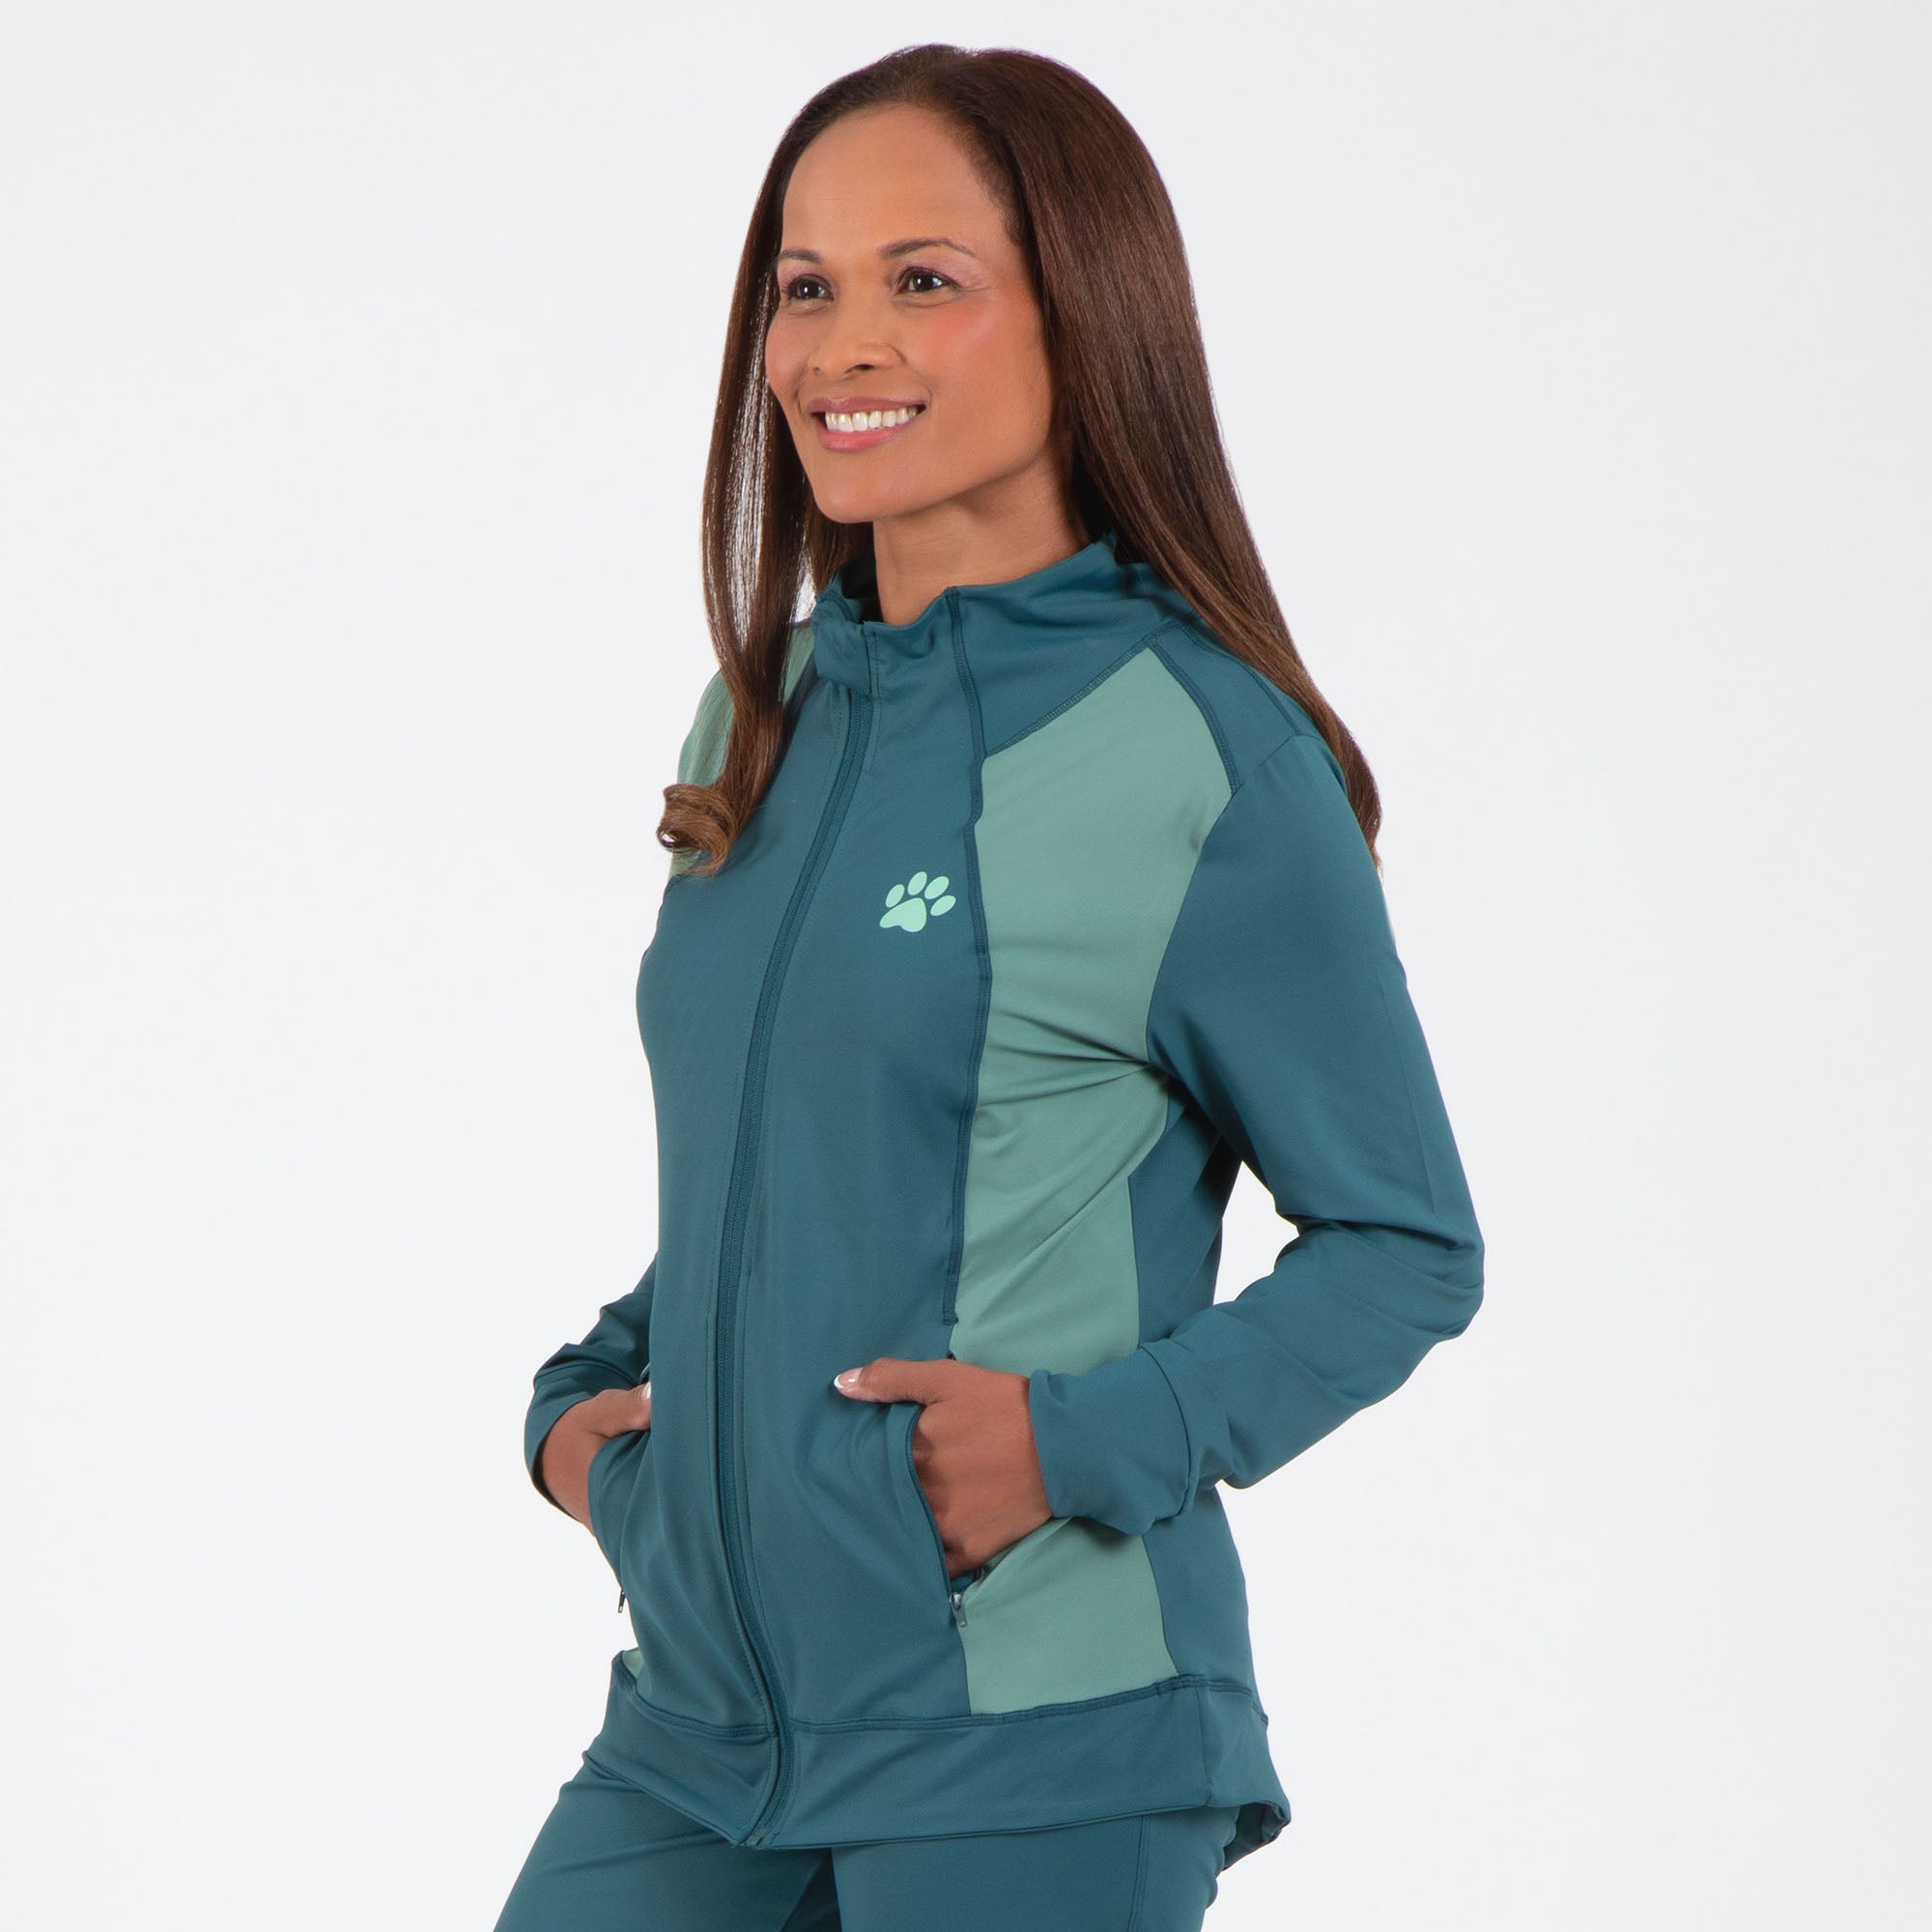 Yoga Paw Print Cross Over Separates - Teal - Jacket - S